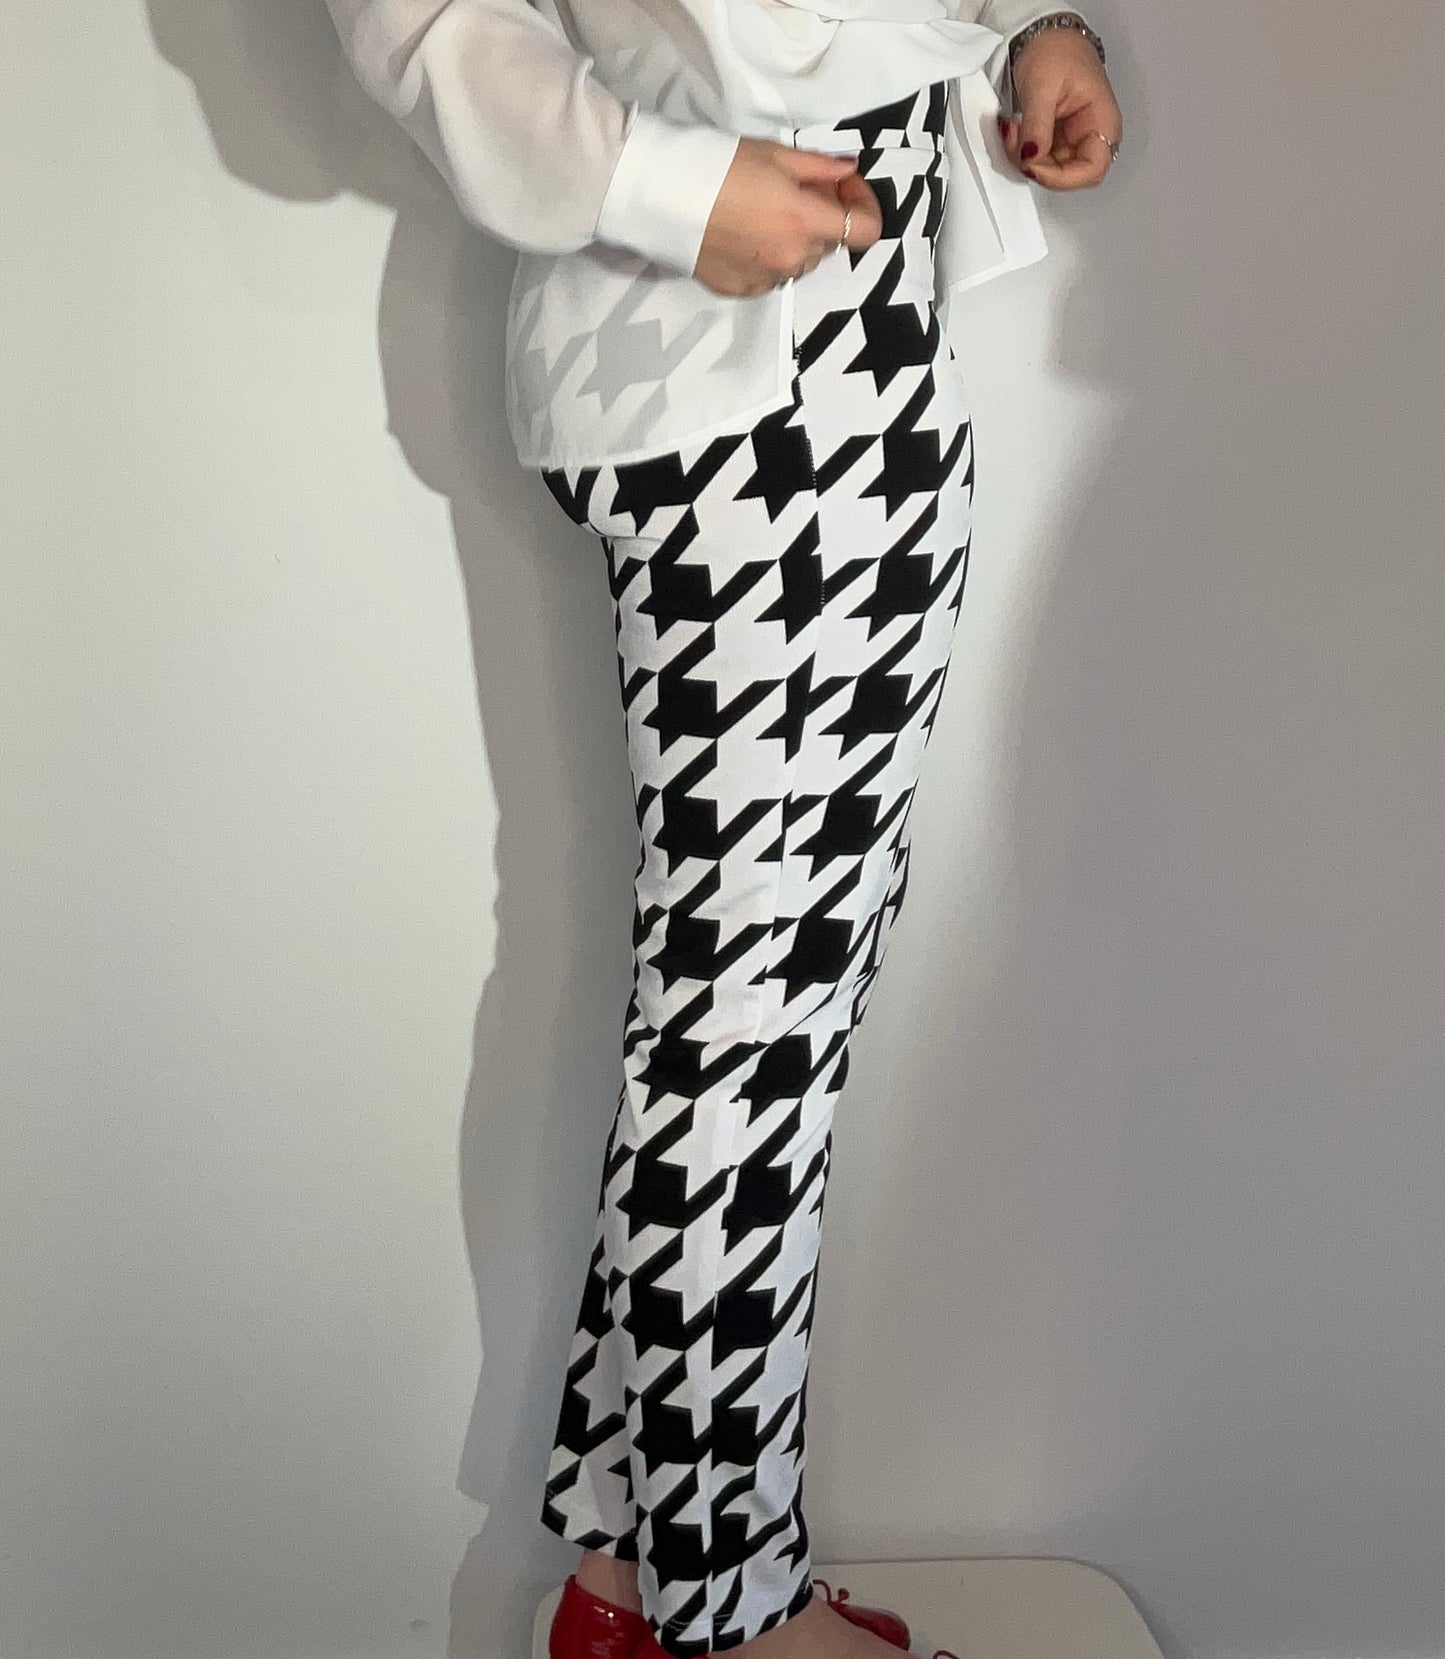 HOUNDSTOOTH PANT